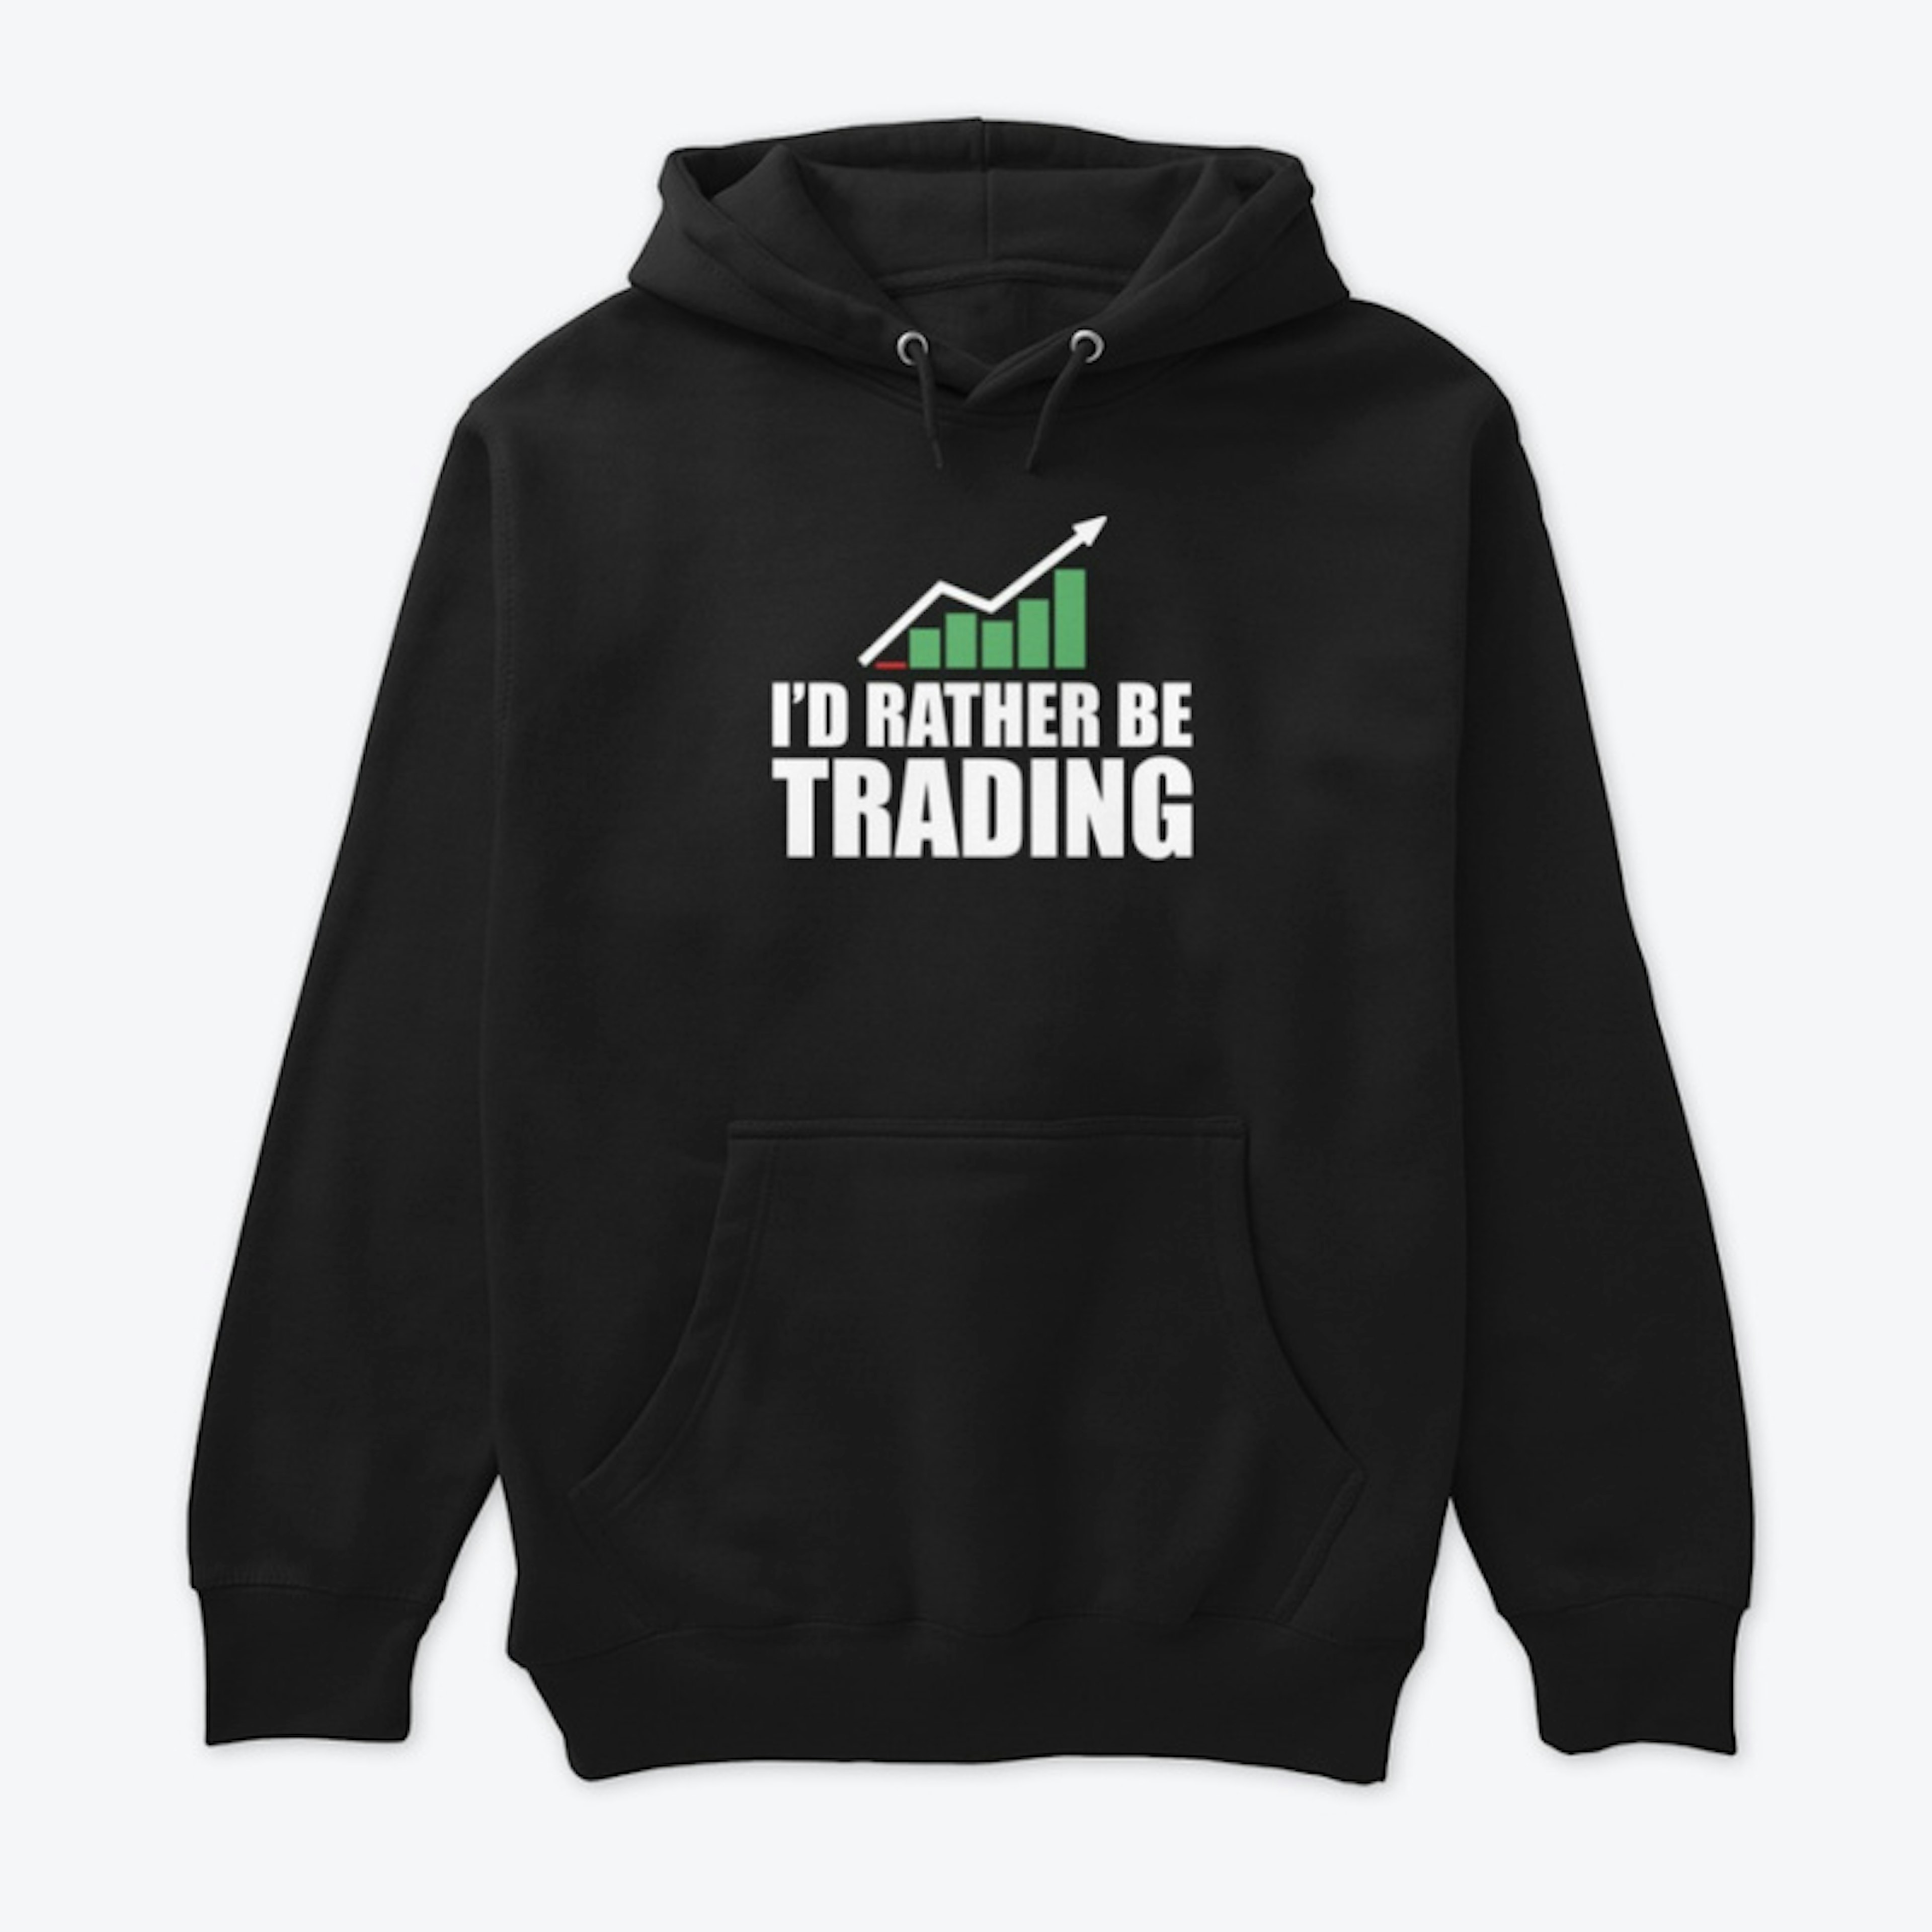 I'D RATHER BE TRADING HOODIE